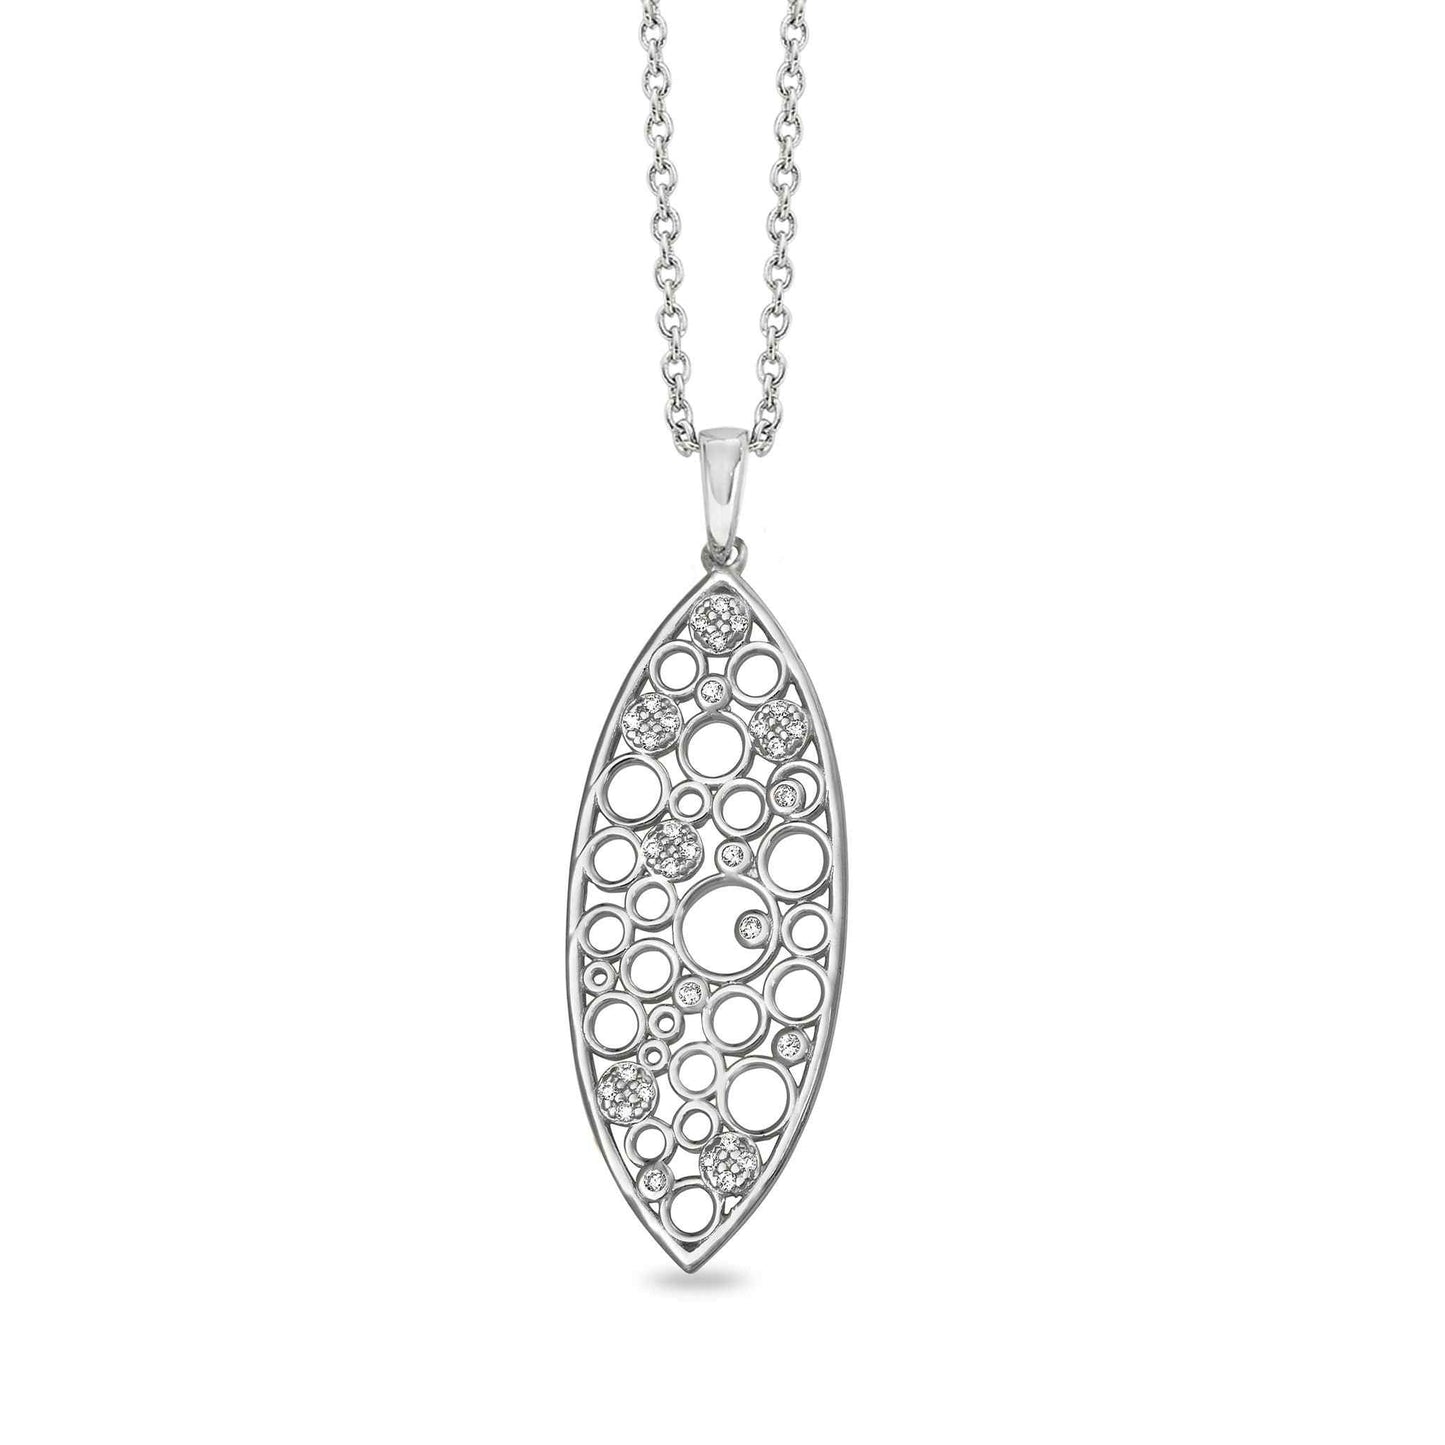 A sterling silver floating circles necklace with simulated diamonds displayed on a neutral white background.